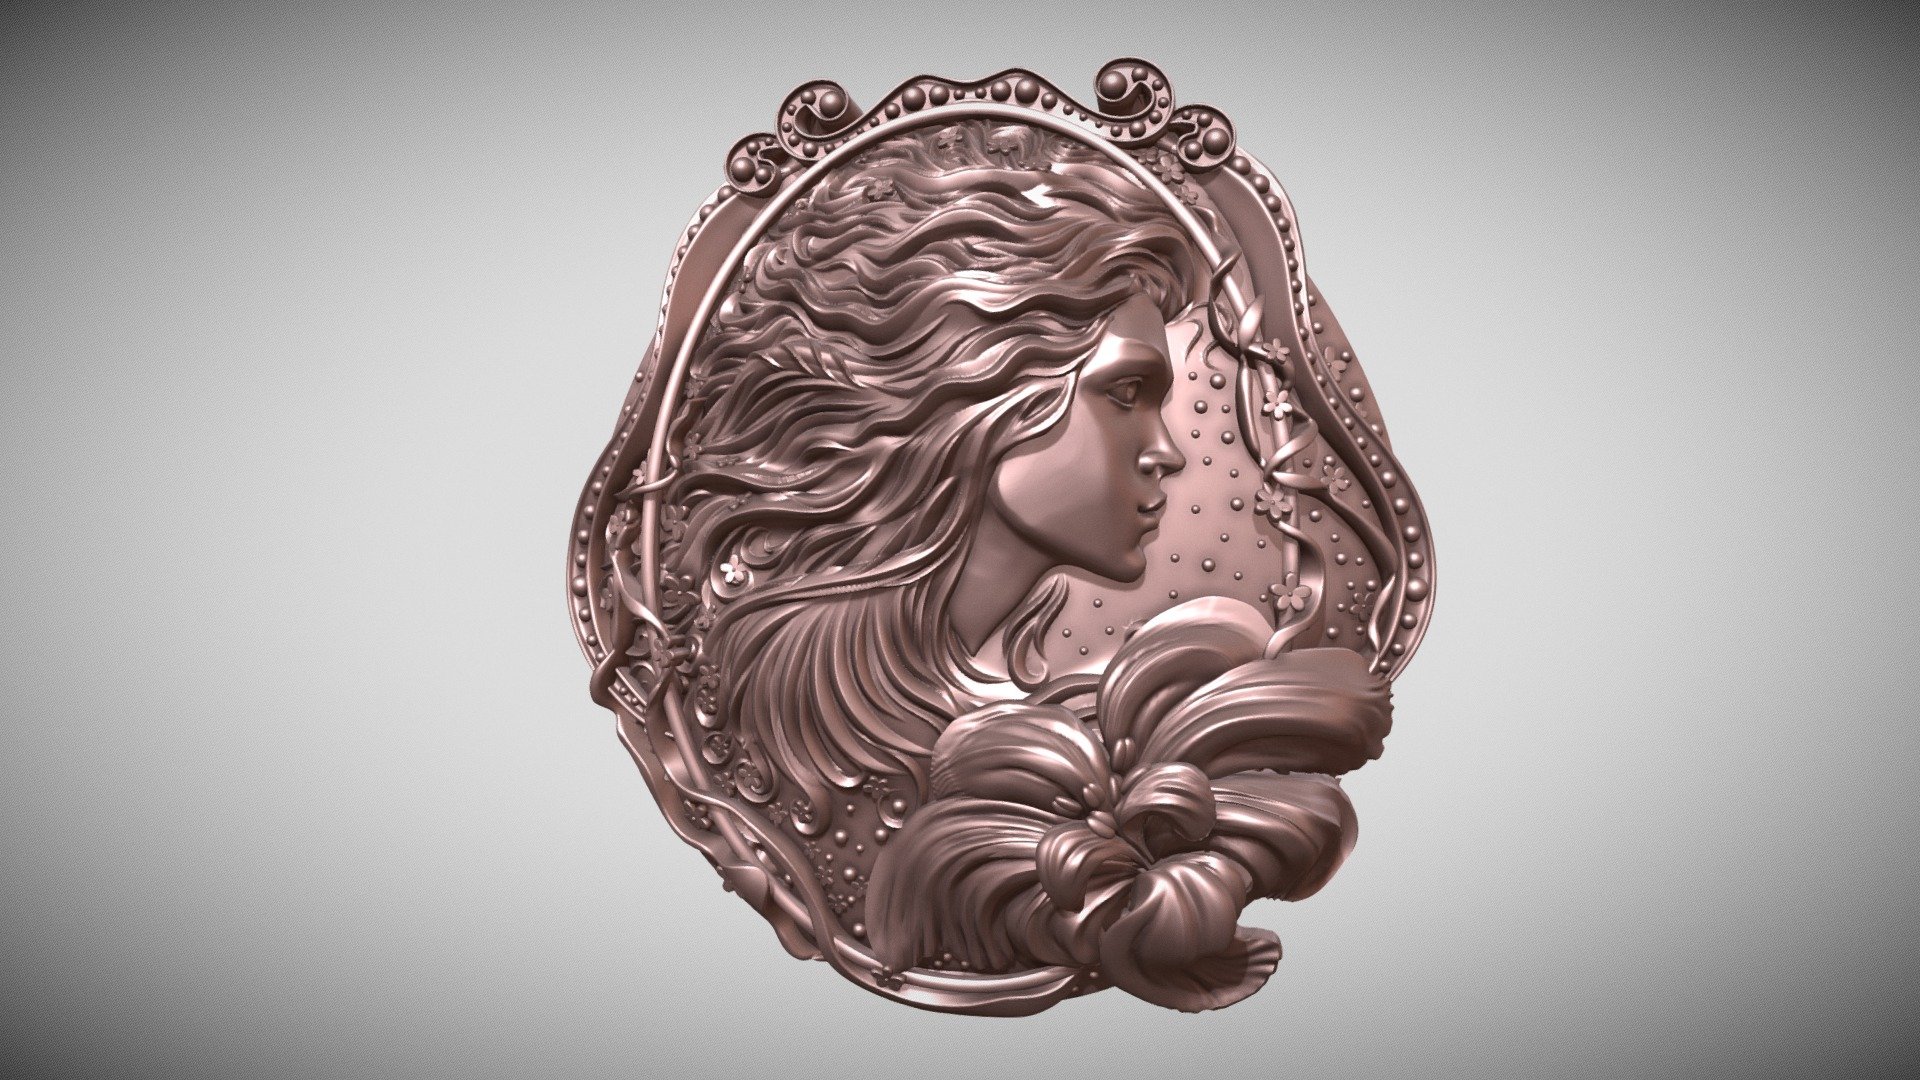 profile of a beautiful girl medallion or cameo, for casting. it is possible to use as a brooch as an independent decor or in combination with other patterns.
The model has a very high resolution, so you can print it both small and large. The height of the model is 50mm.

Model geometry is mesh (polygonal),this is not a Nurbs geometry.
It is designed for printing and casting and technically cannot be converted to NURBS geometry 3d model